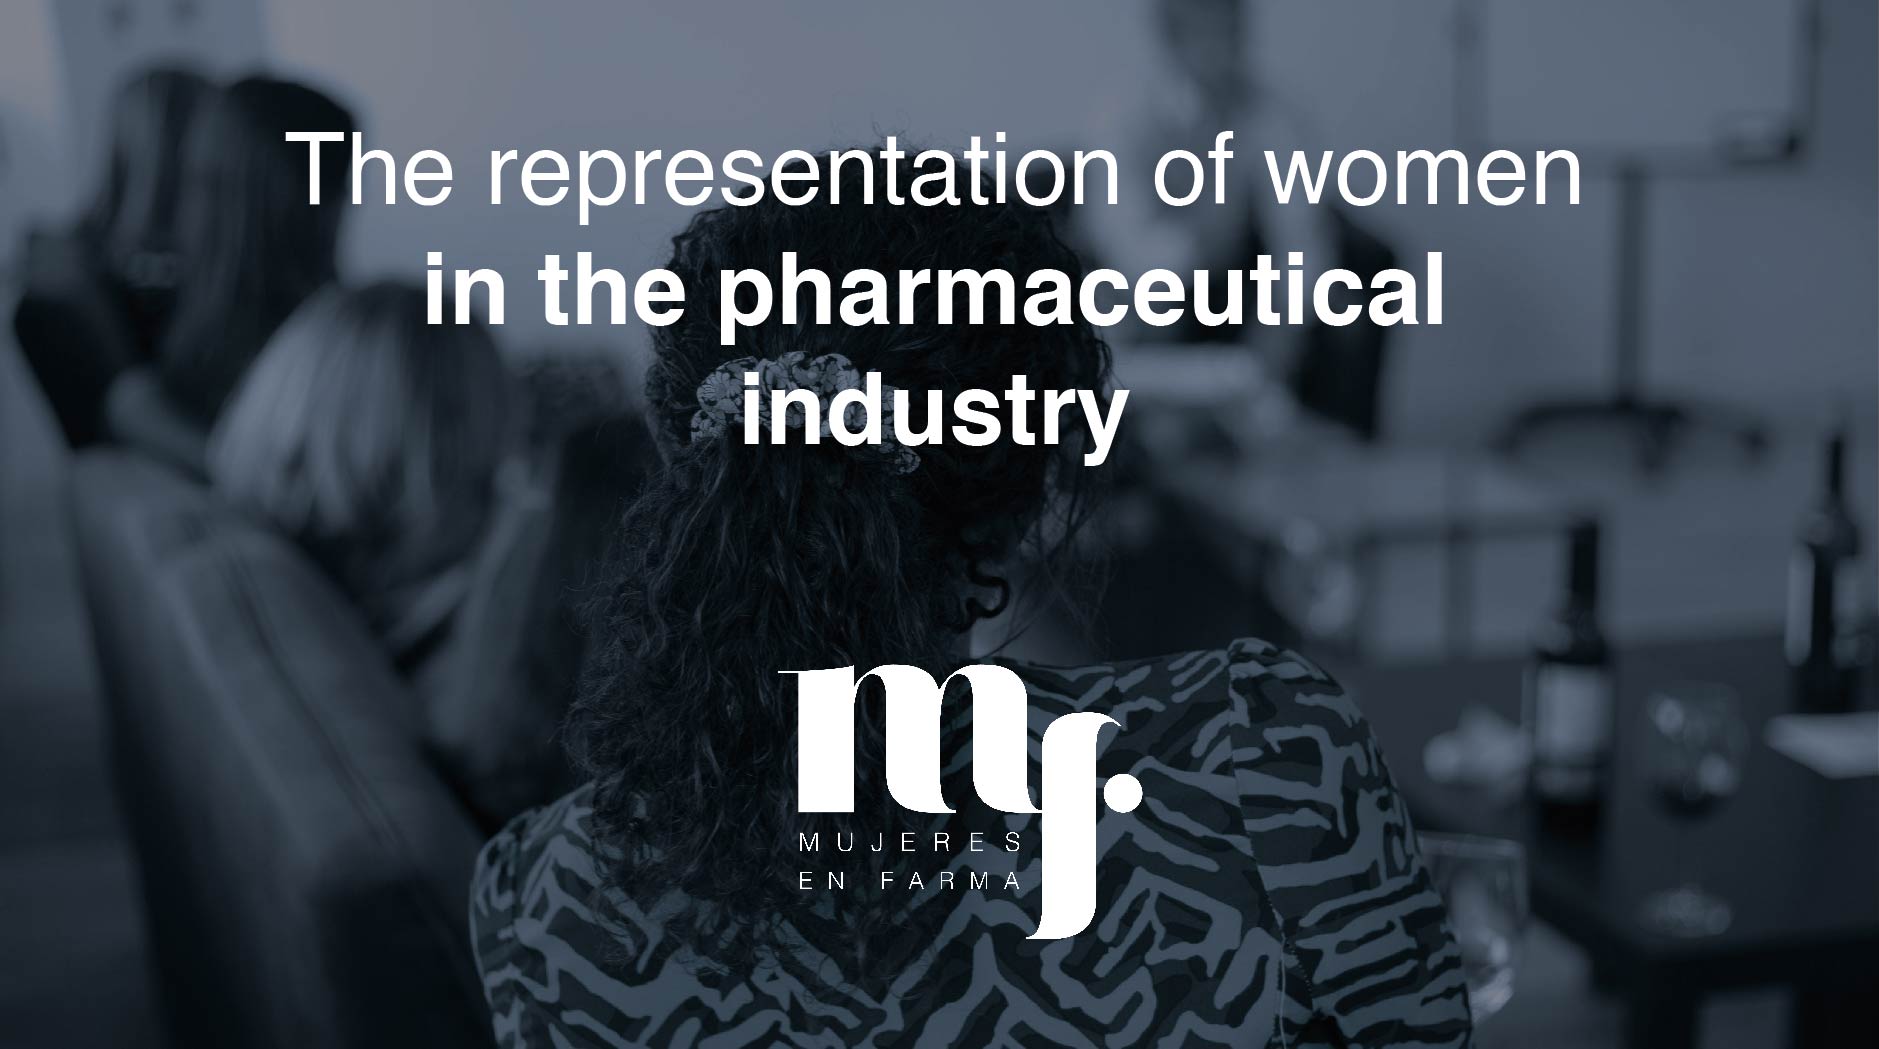 How the work environment in the pharmaceutical sector affects women - #BHHMembersInitiatives